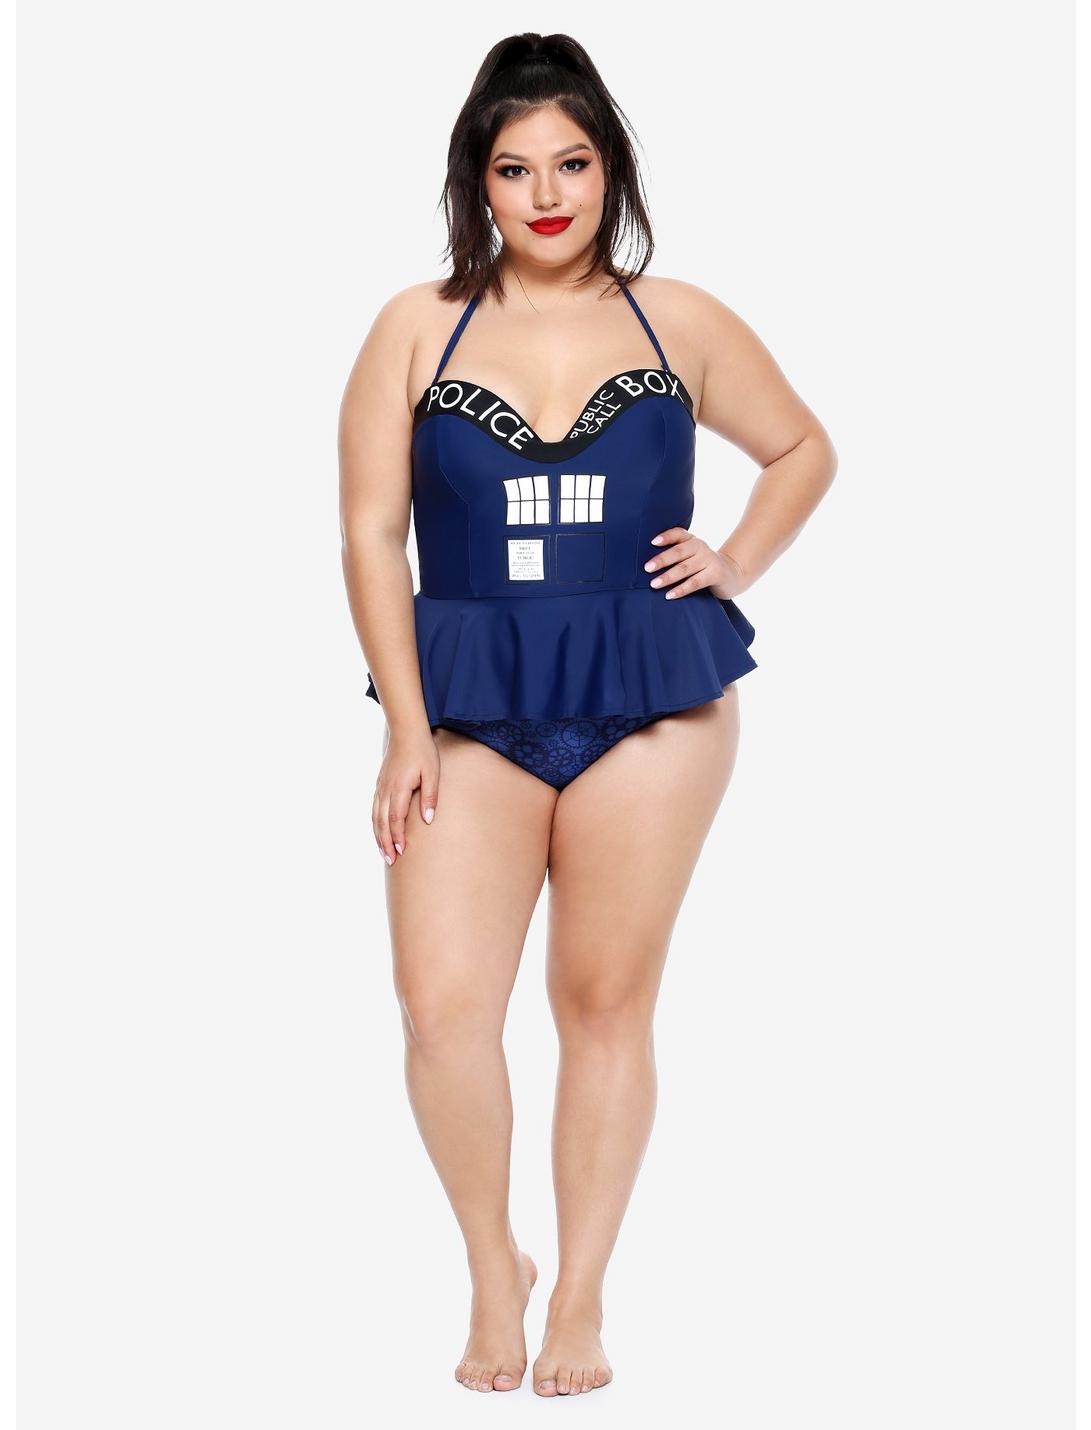 Doctor Who Gears Swim Bottoms Plus Size, BLUE, hi-res